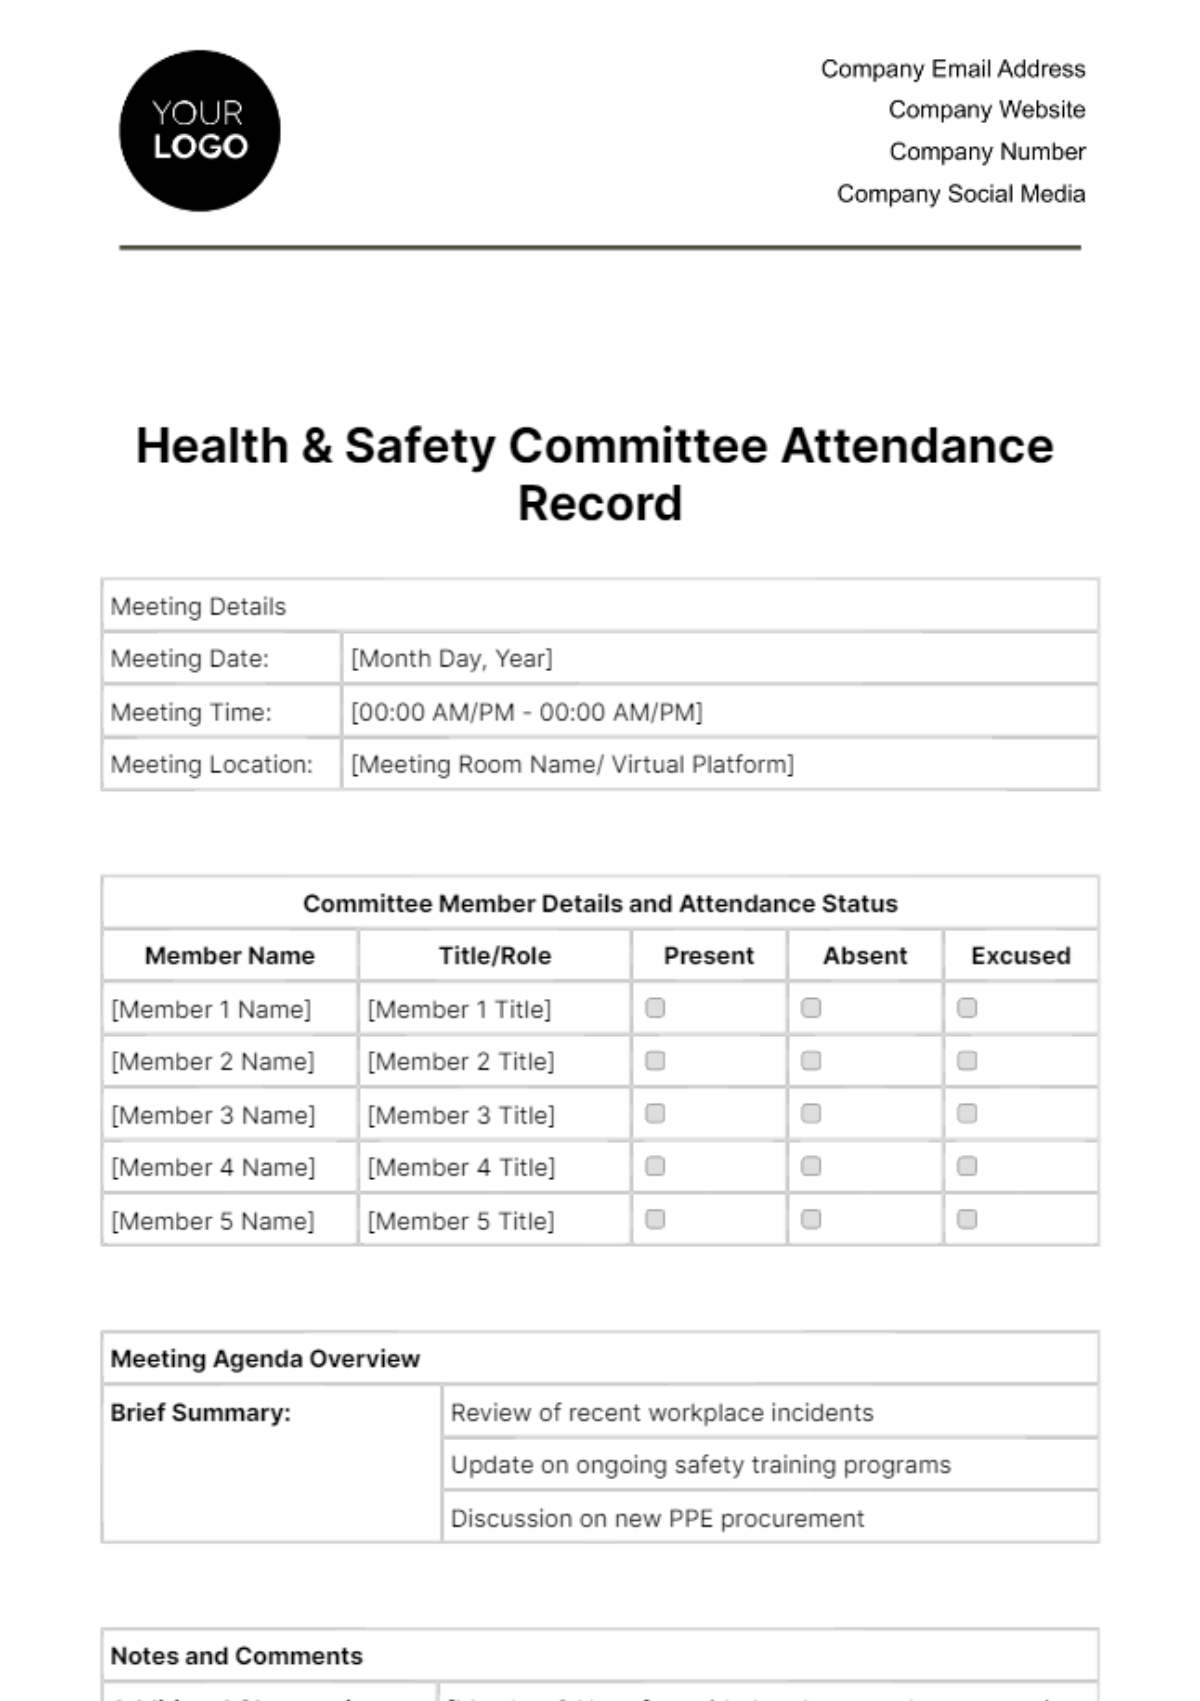 Health & Safety Committee Attendance Record Template